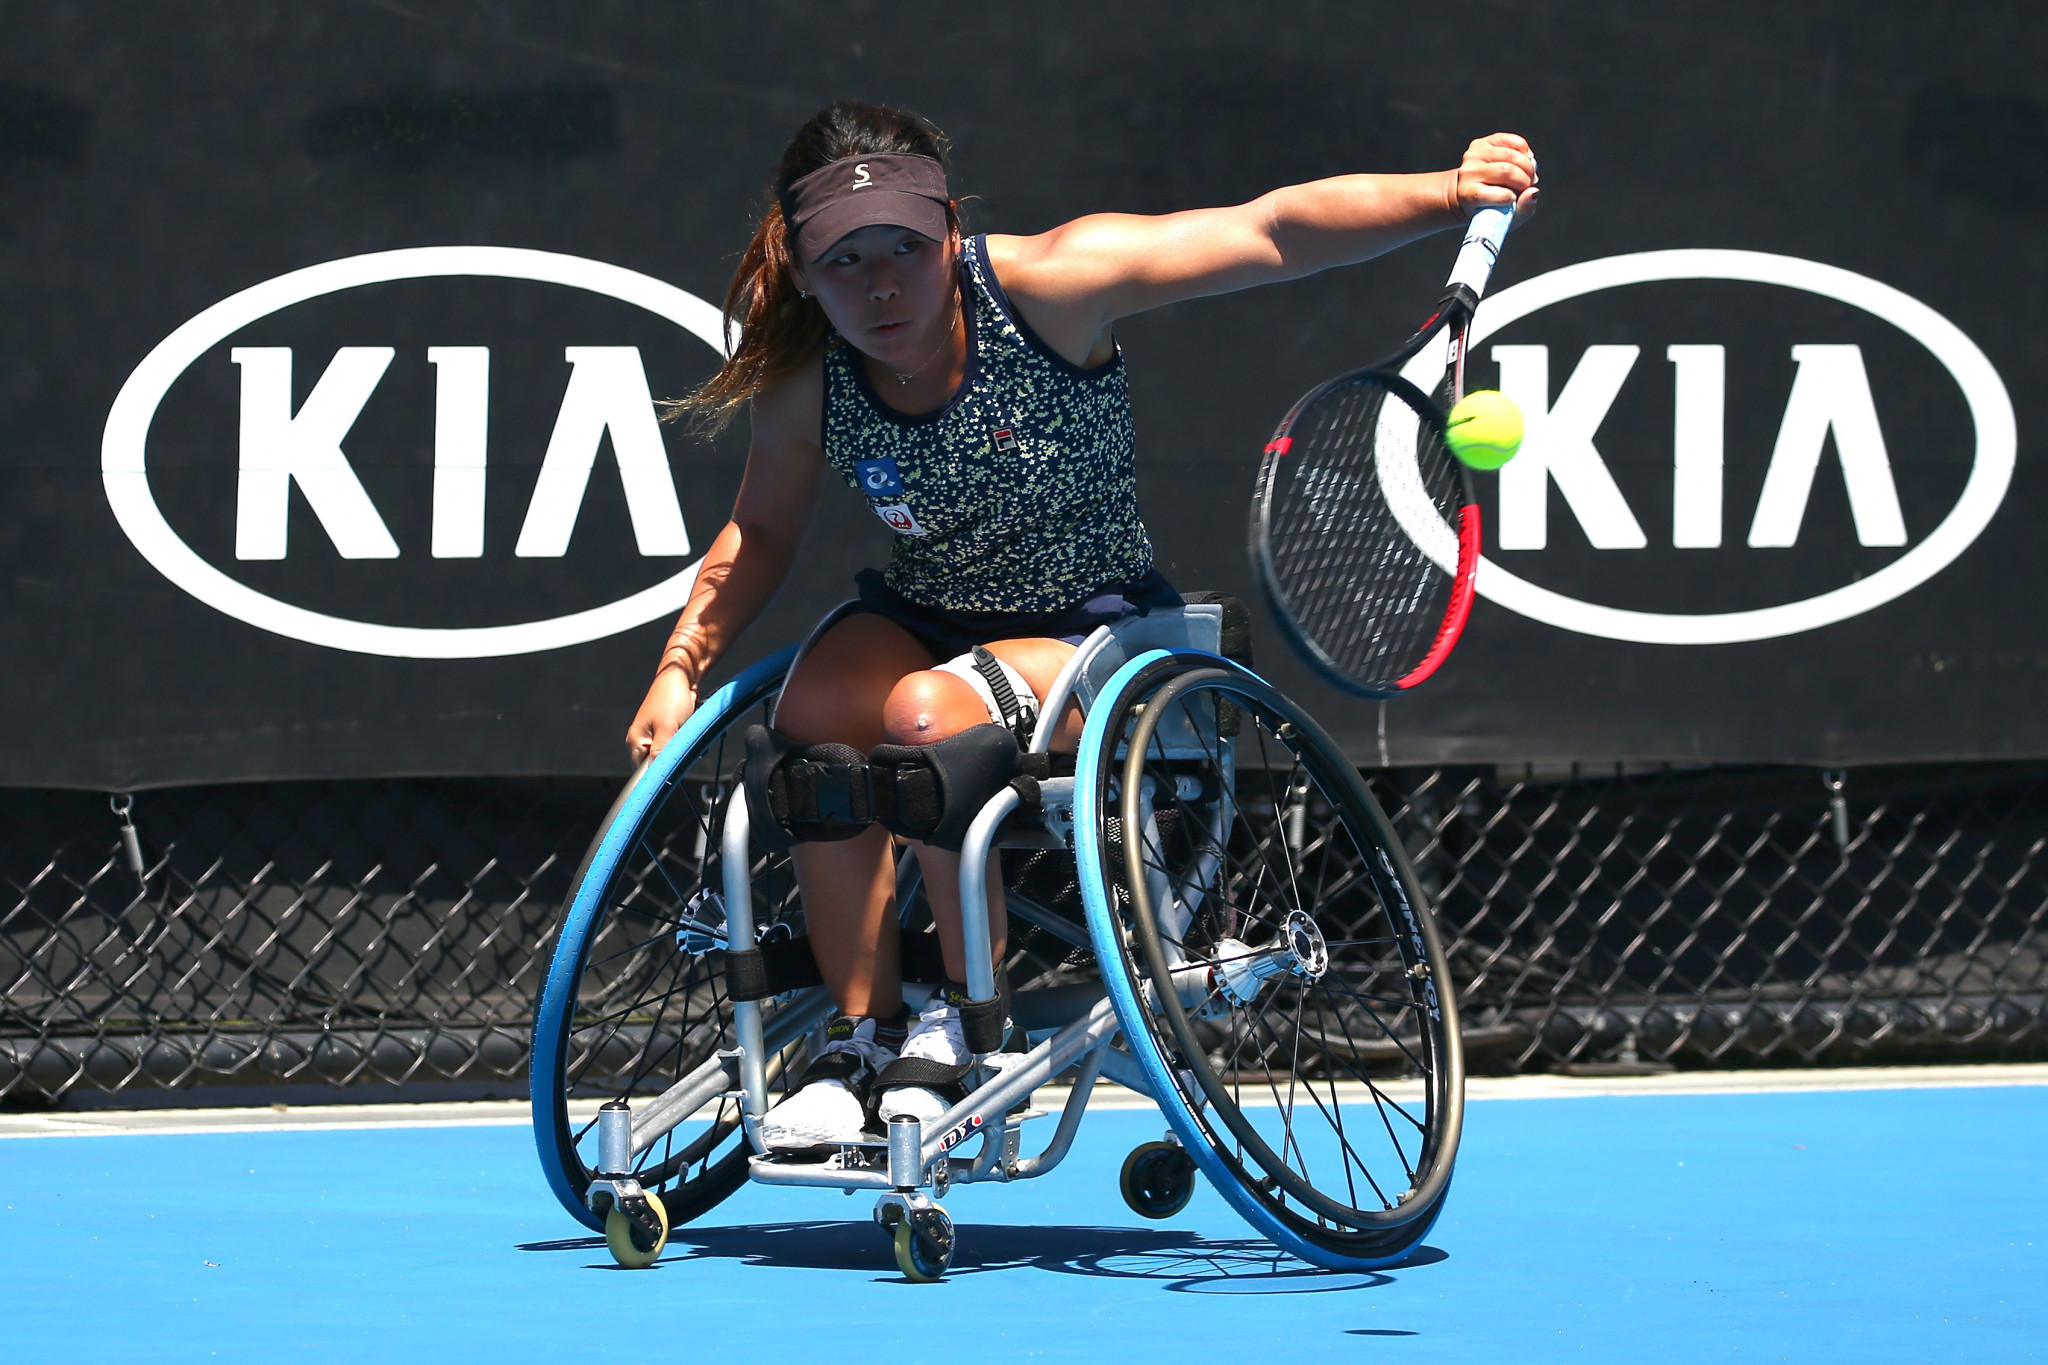 Yui Kamiji won the women's title in Melbourne ©Getty Images